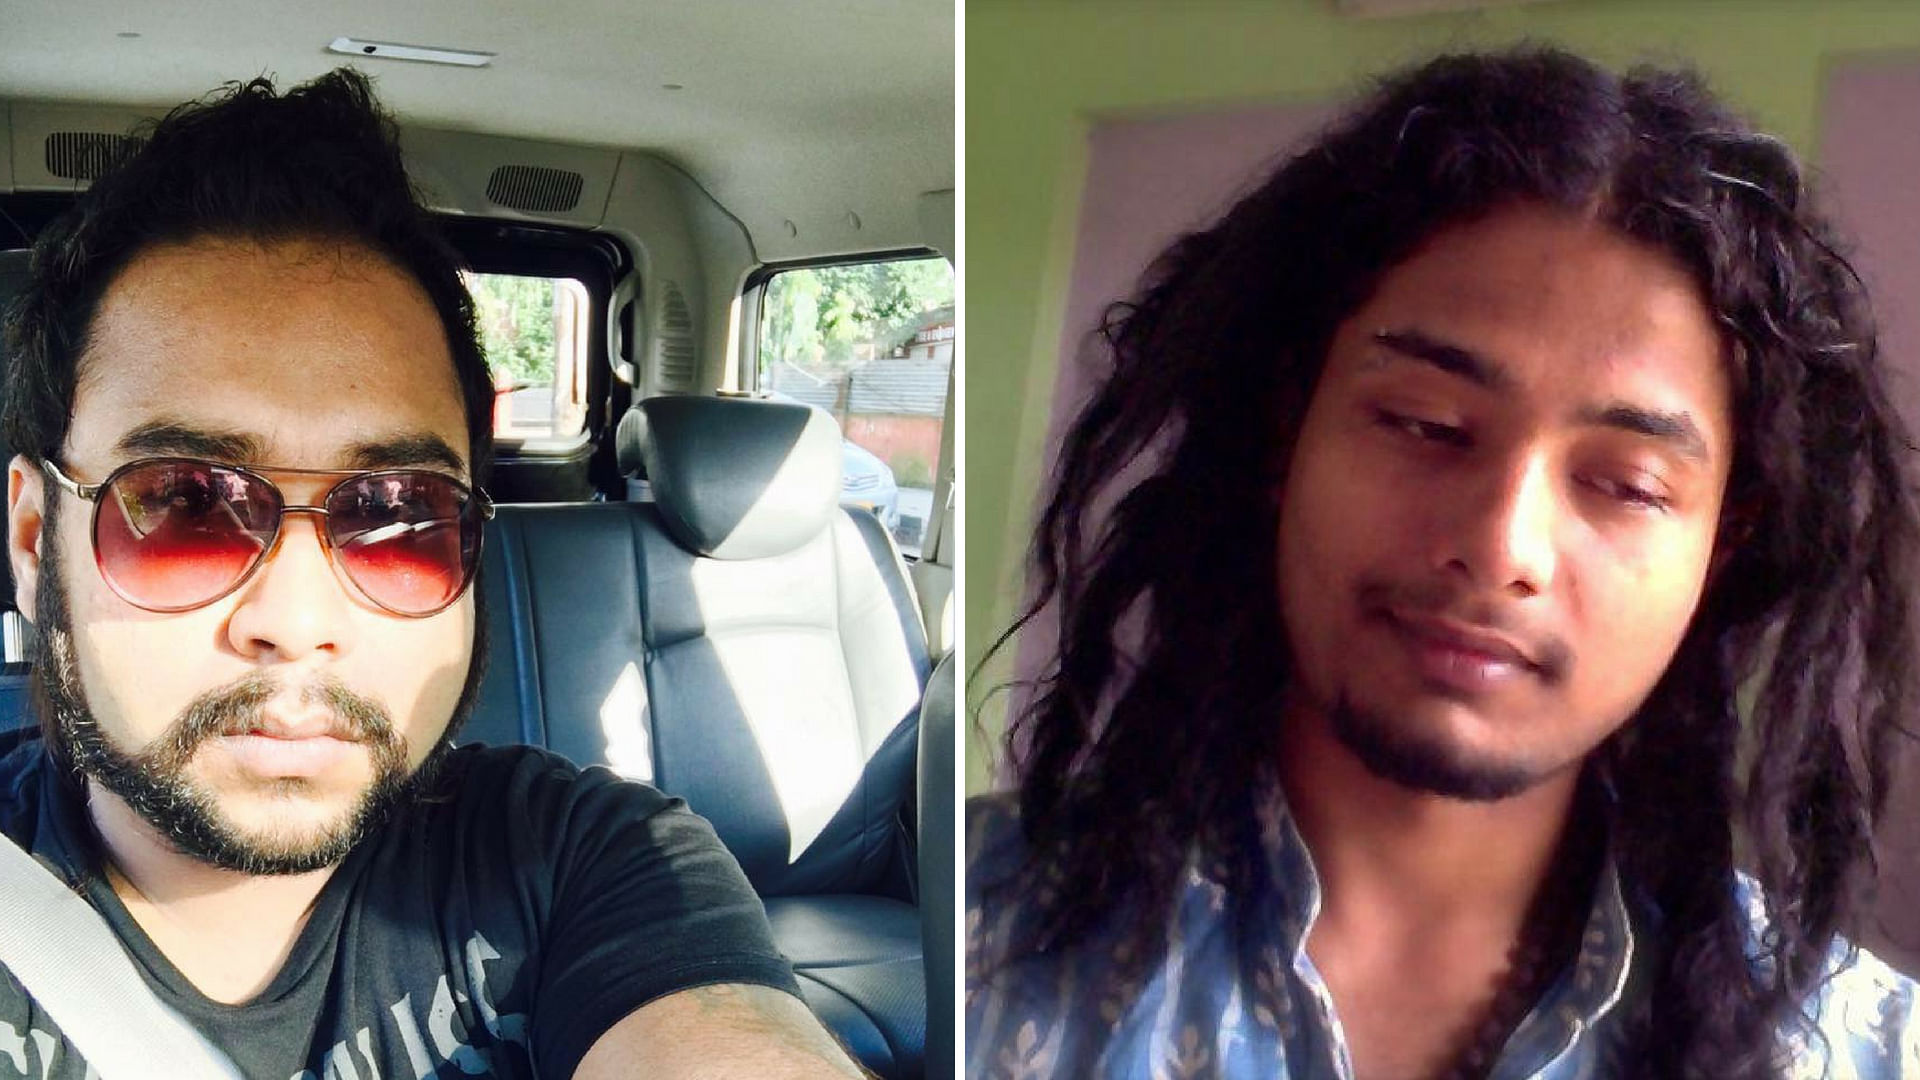  Nilotpal Das (right), a sound engineer based in Mumbai, and his friend Abhijeet Nath, a businessman were lynched by a mob in Karbi Anglong district of Assam on 8 June.